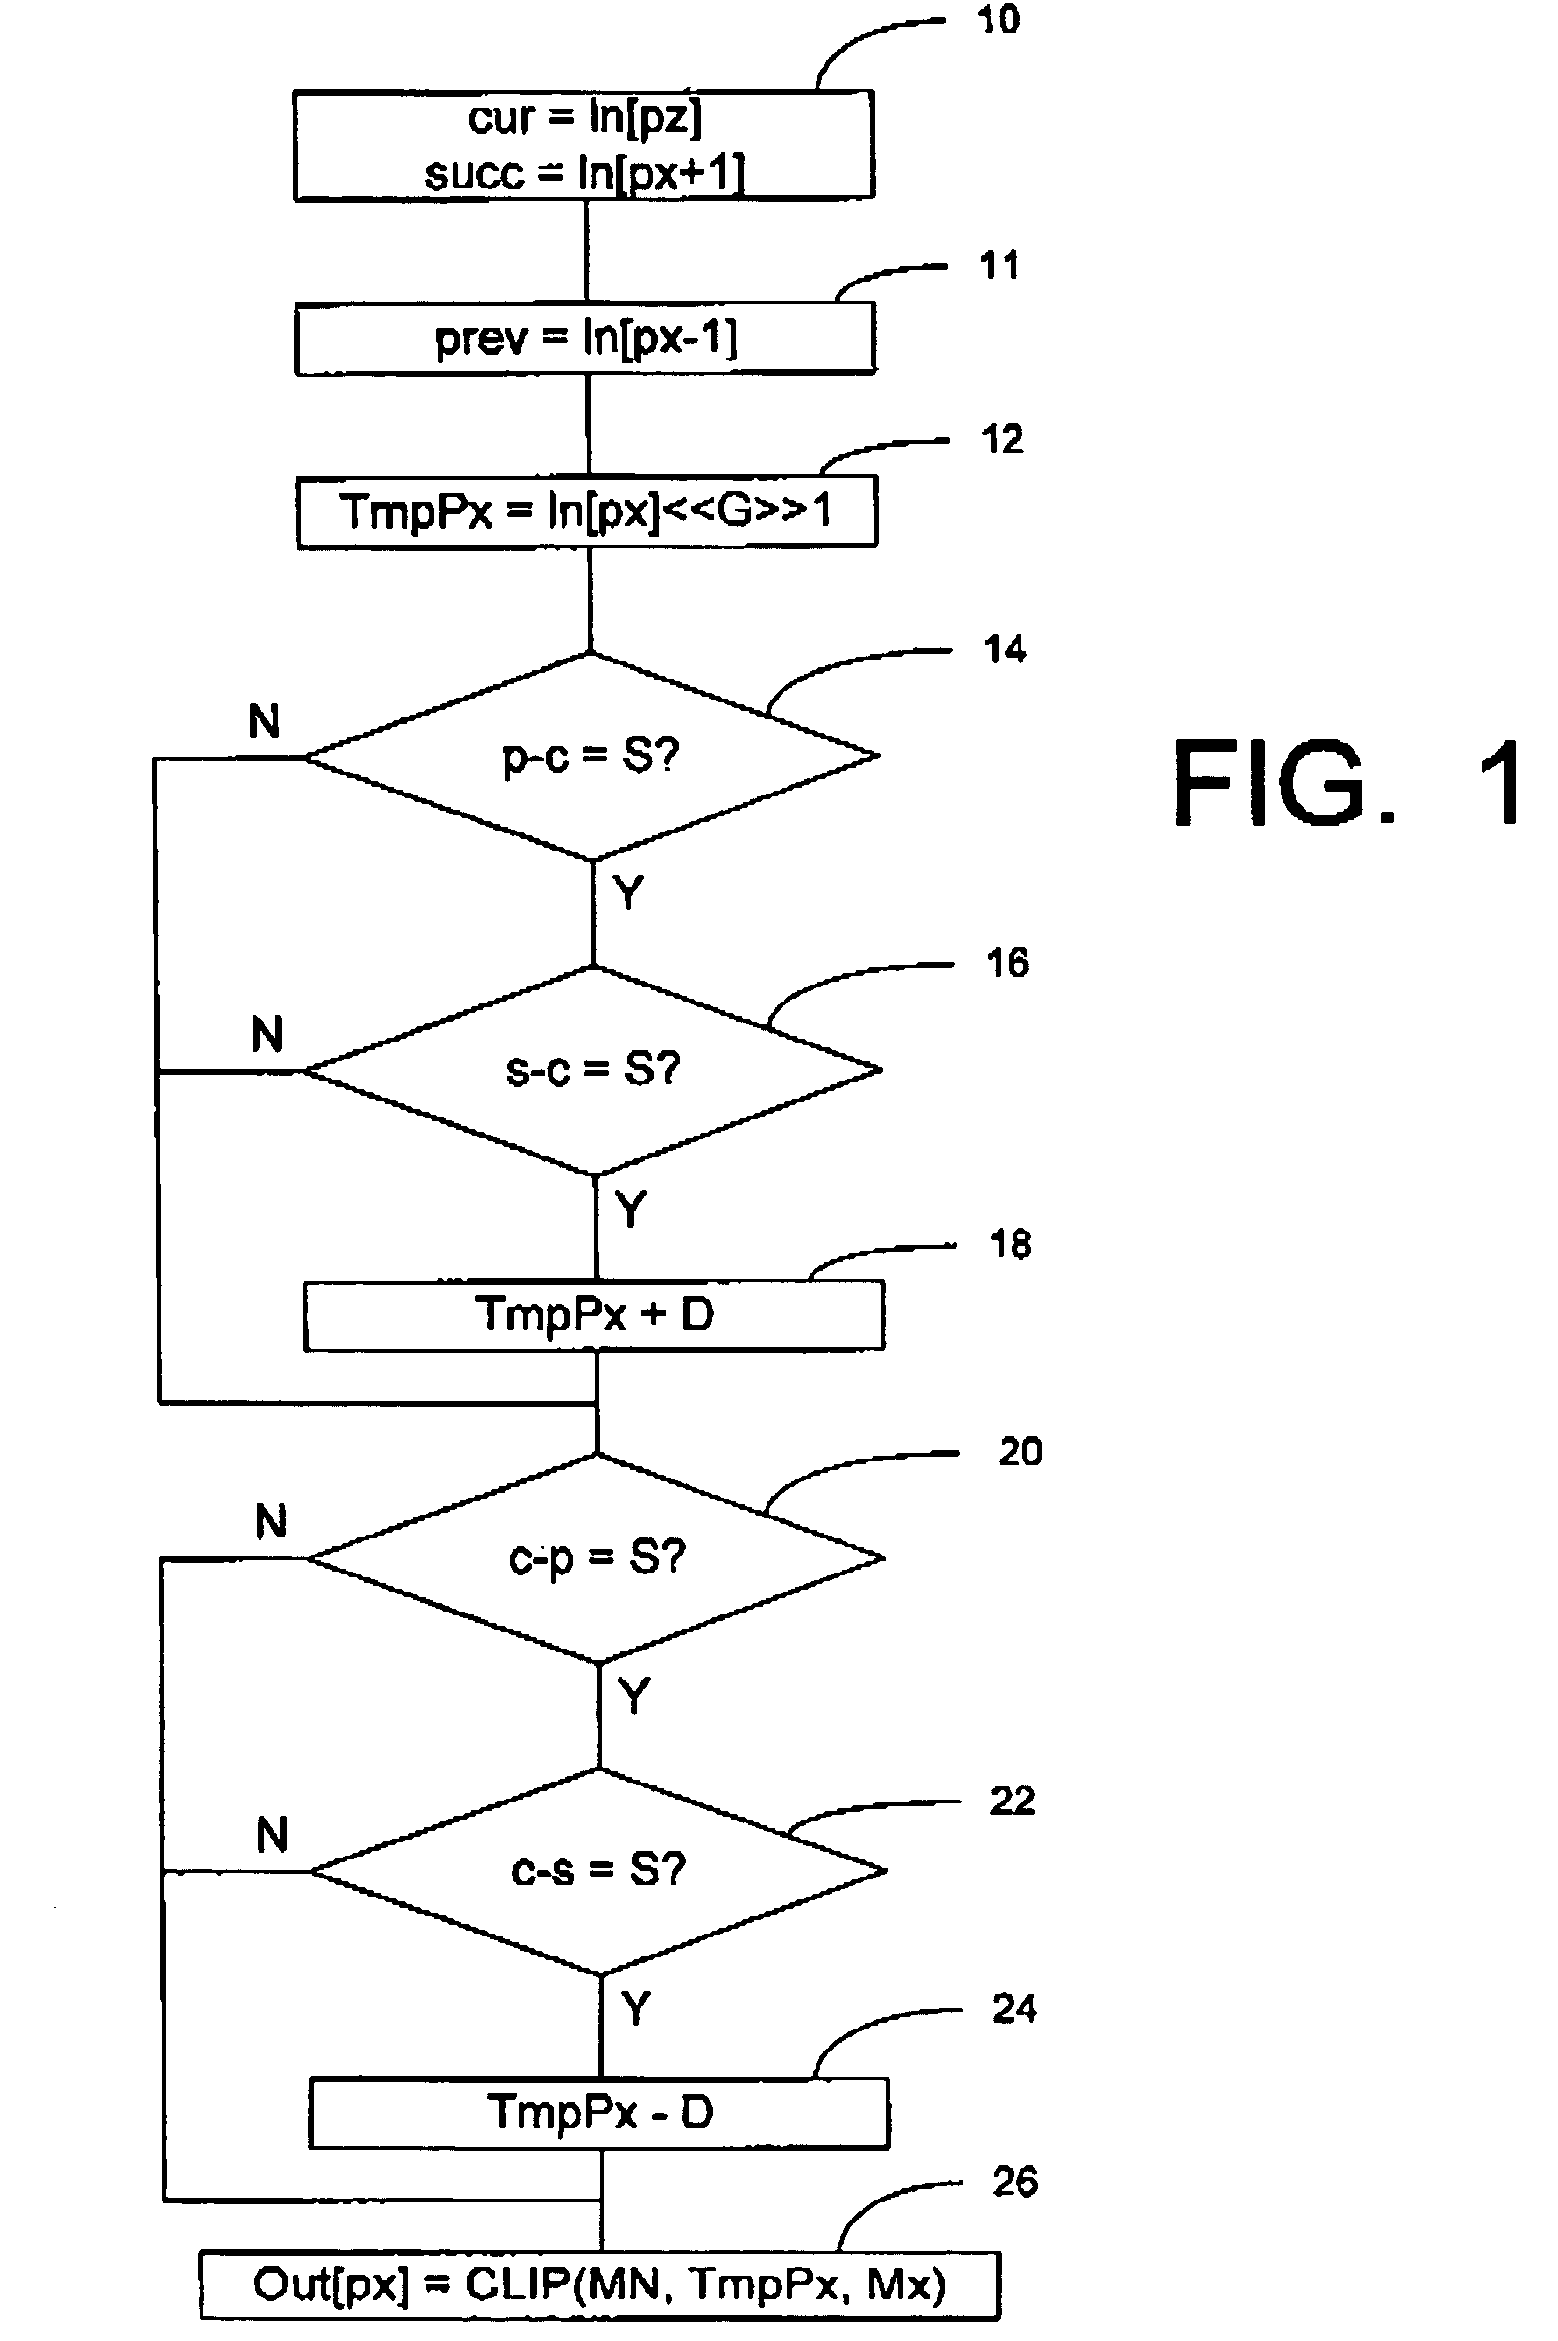 Method and apparatus for dithering or undithering data words in a data stream